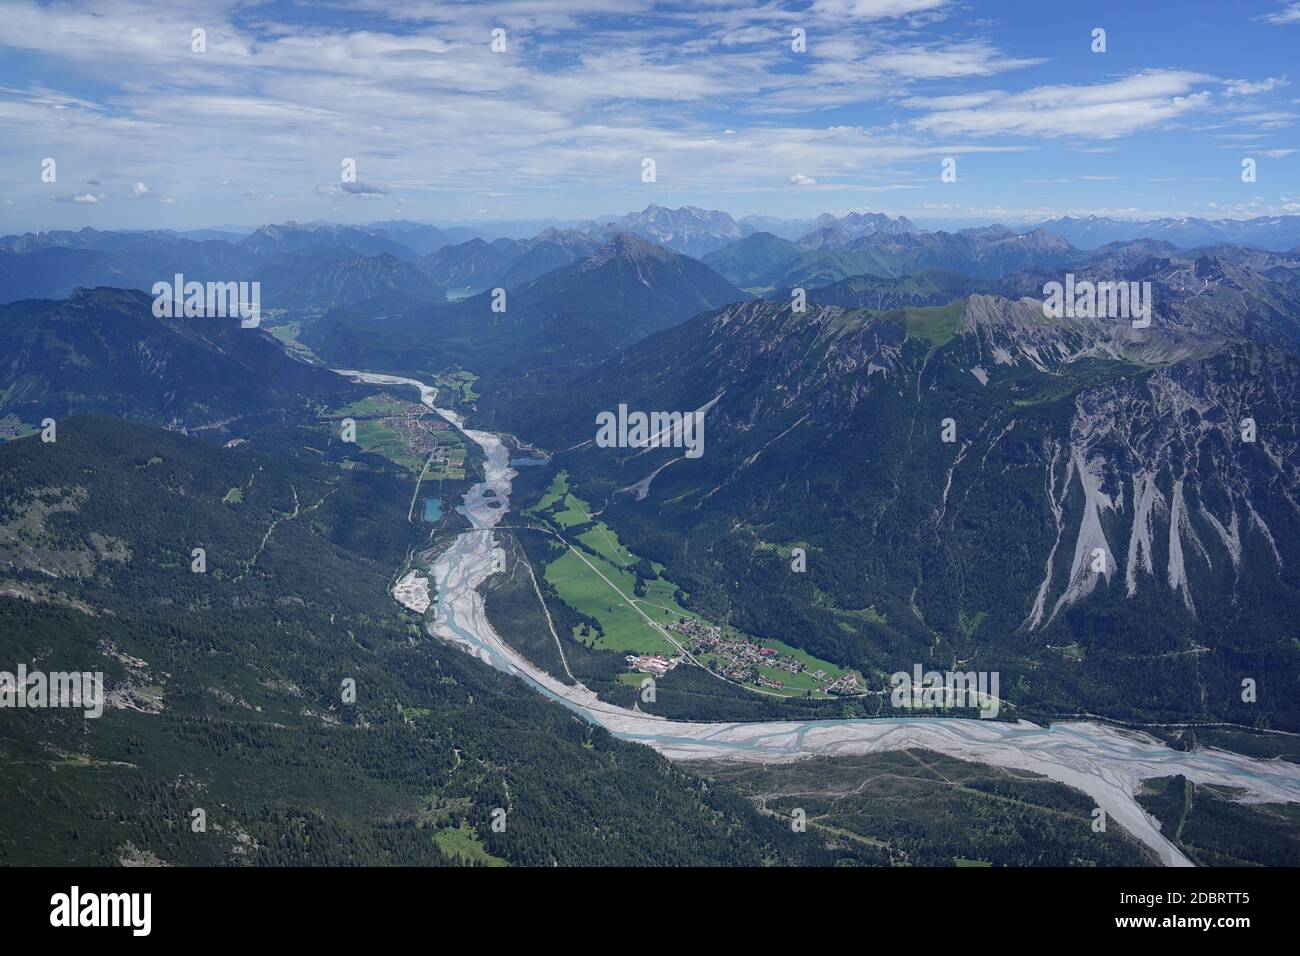 Aerial view of the Lech Valley with the mountains in Tyrol / Austria. Stock Photo